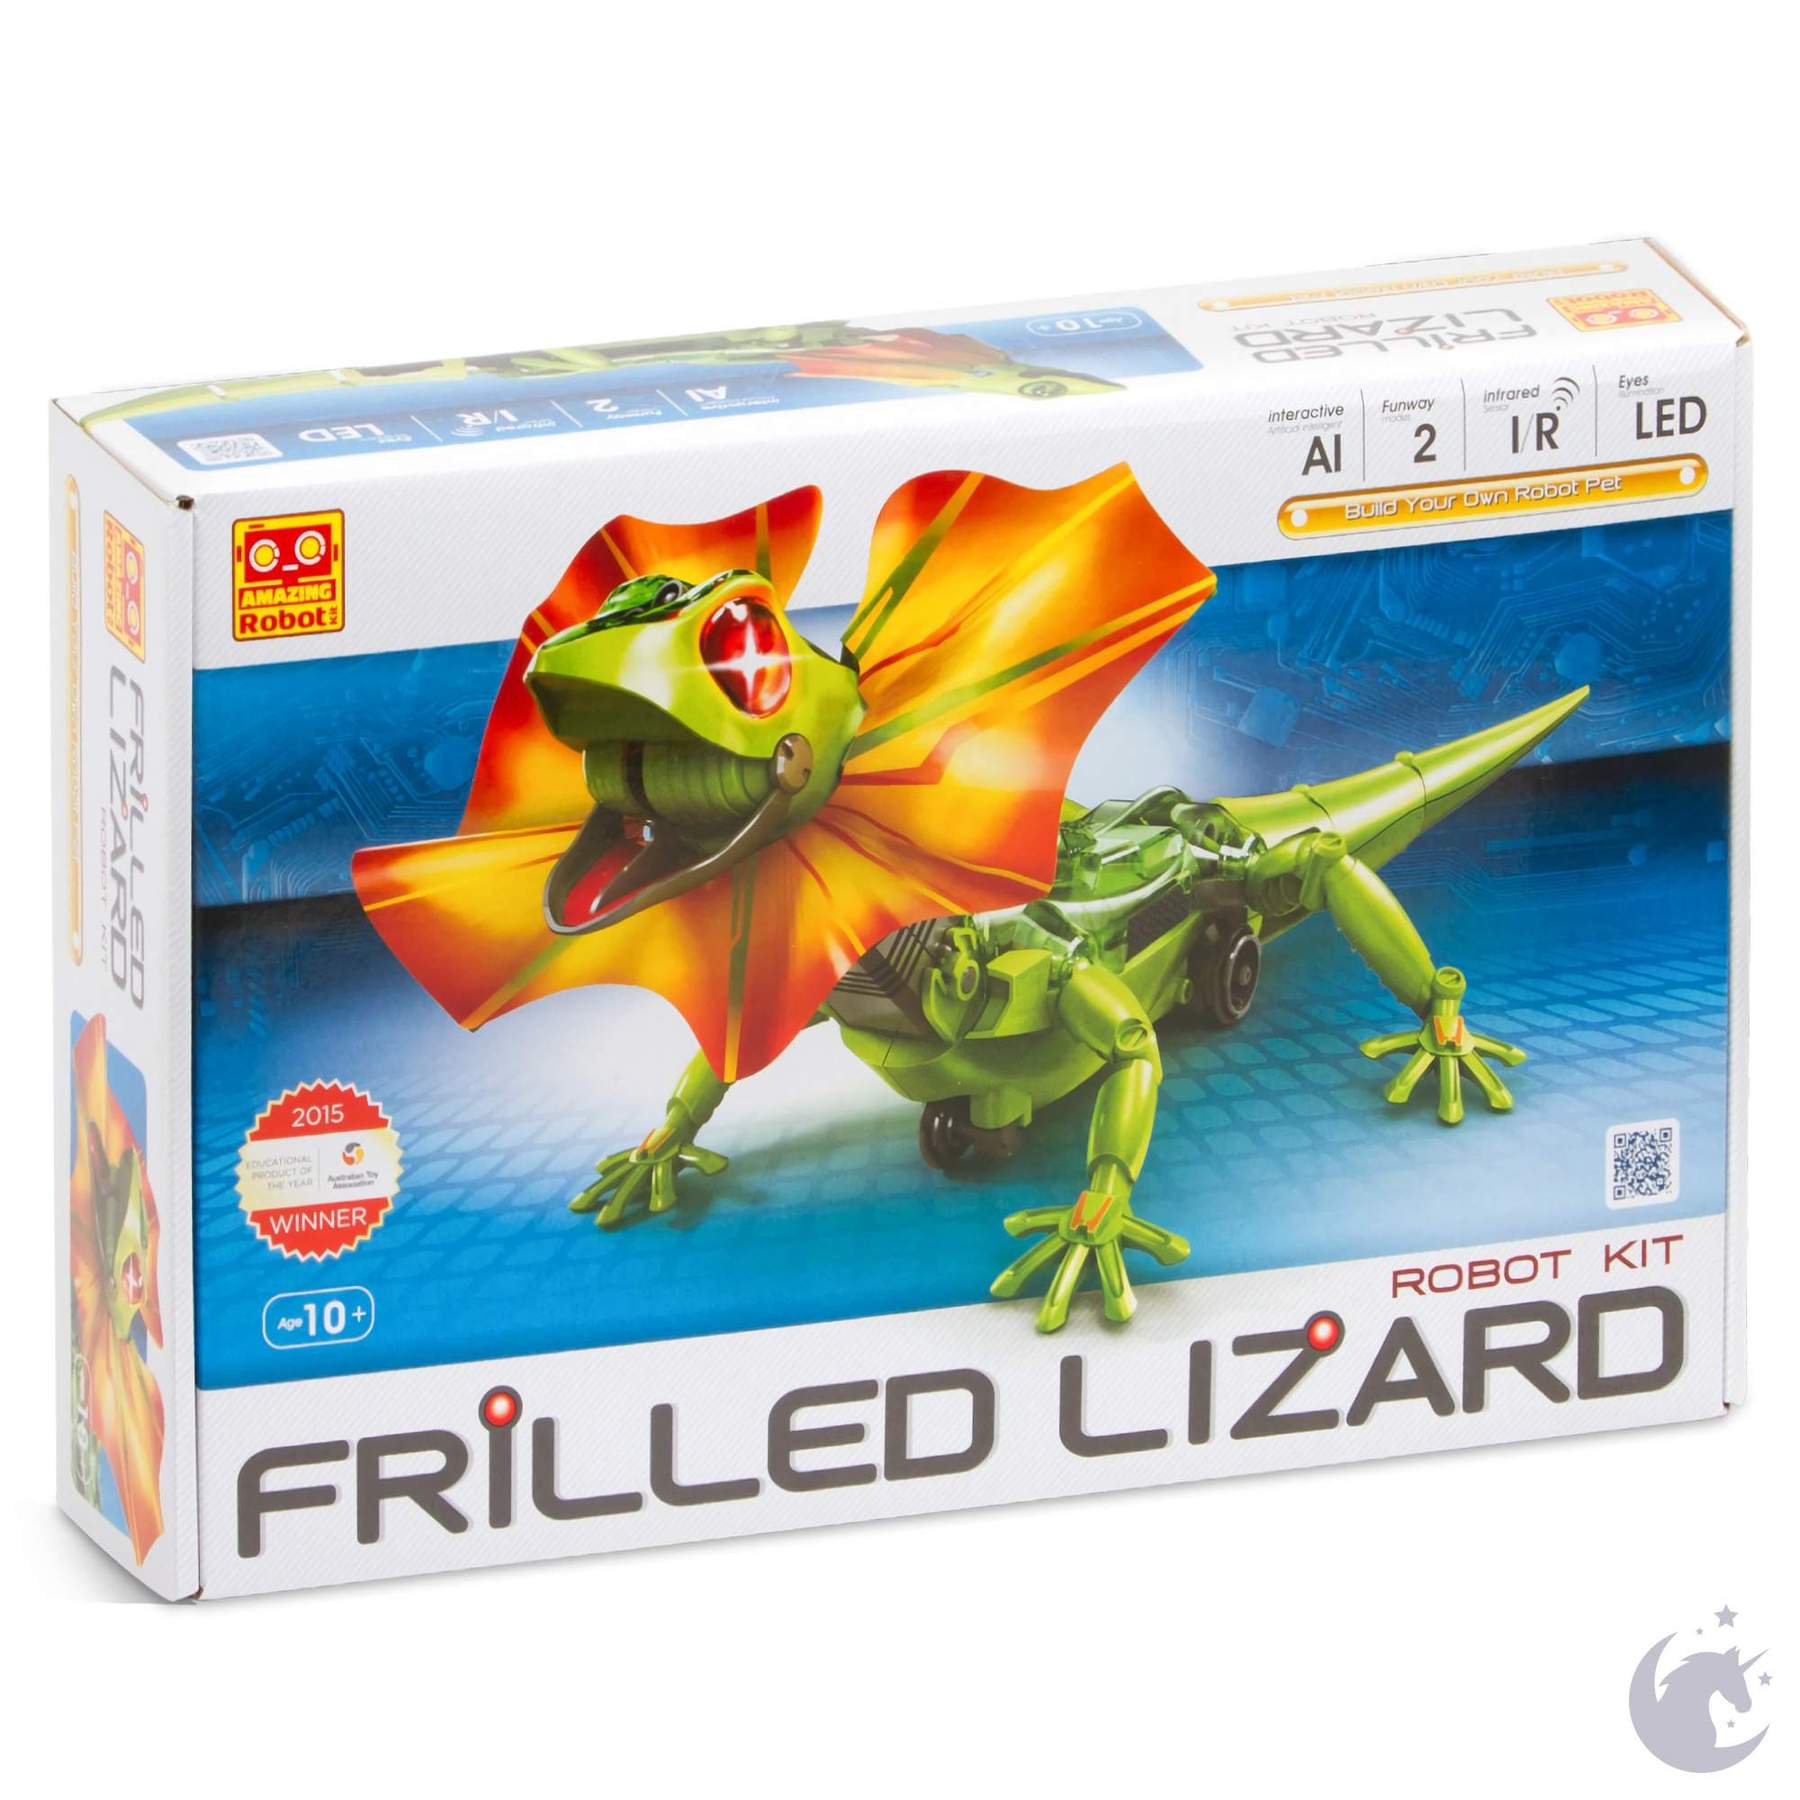 Frilled Lizard Kaboodles Toy Store - Victoria